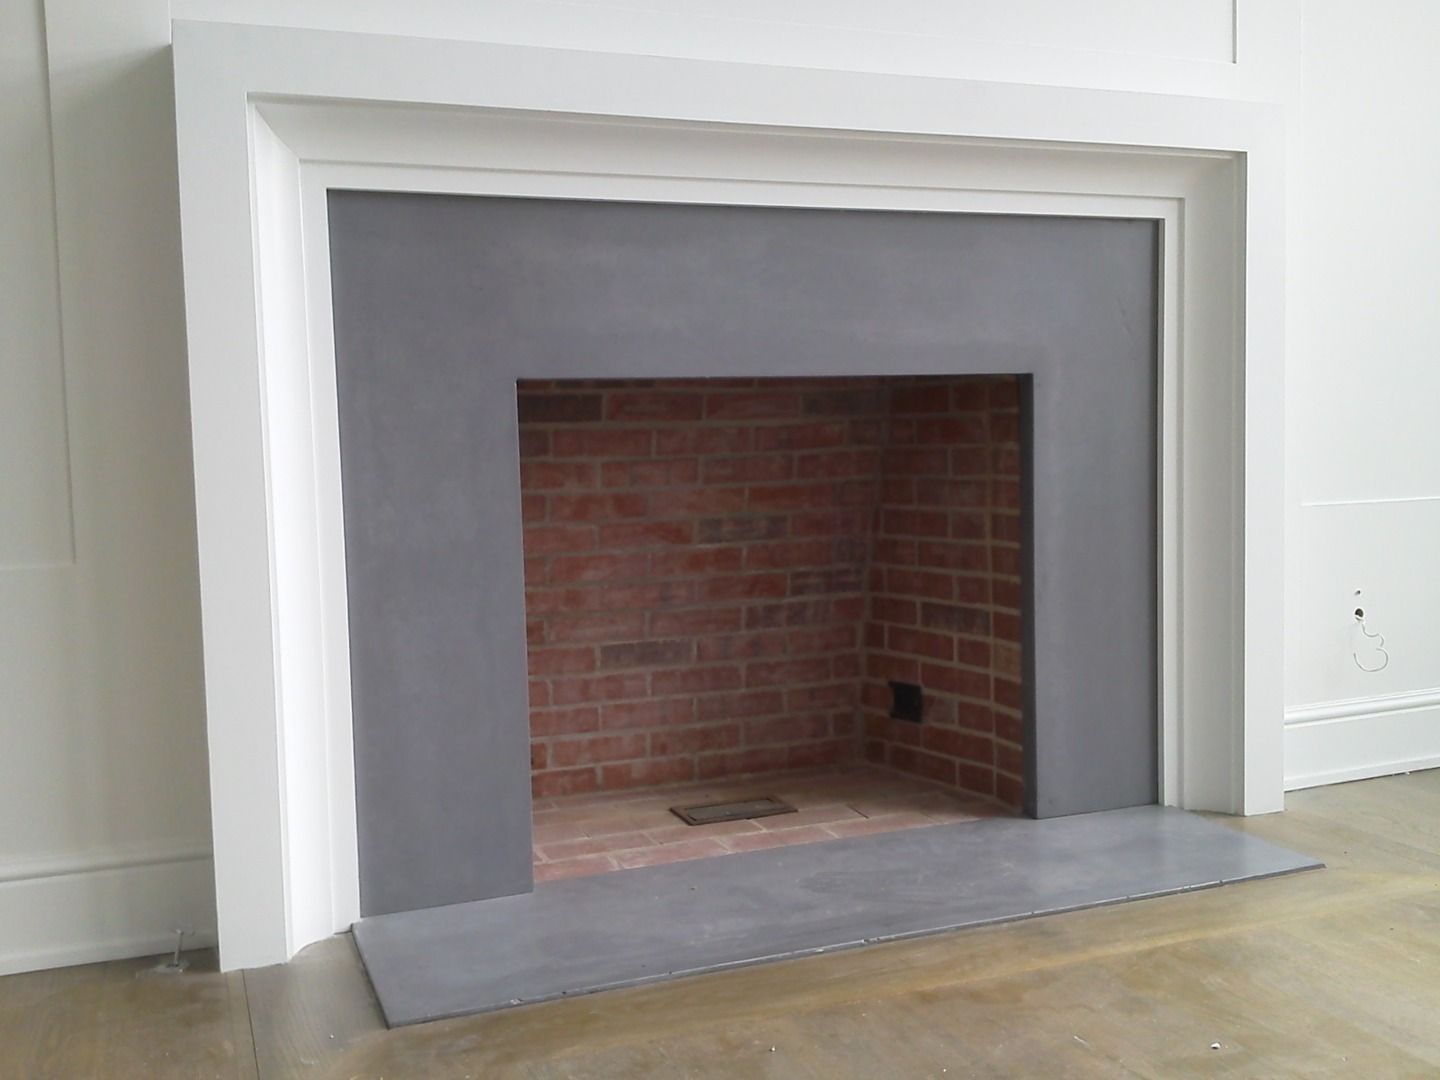 Pictures Of Fireplace Hearths Luxury Stone Surround You Would Need Much Thinner Mantle Piece I